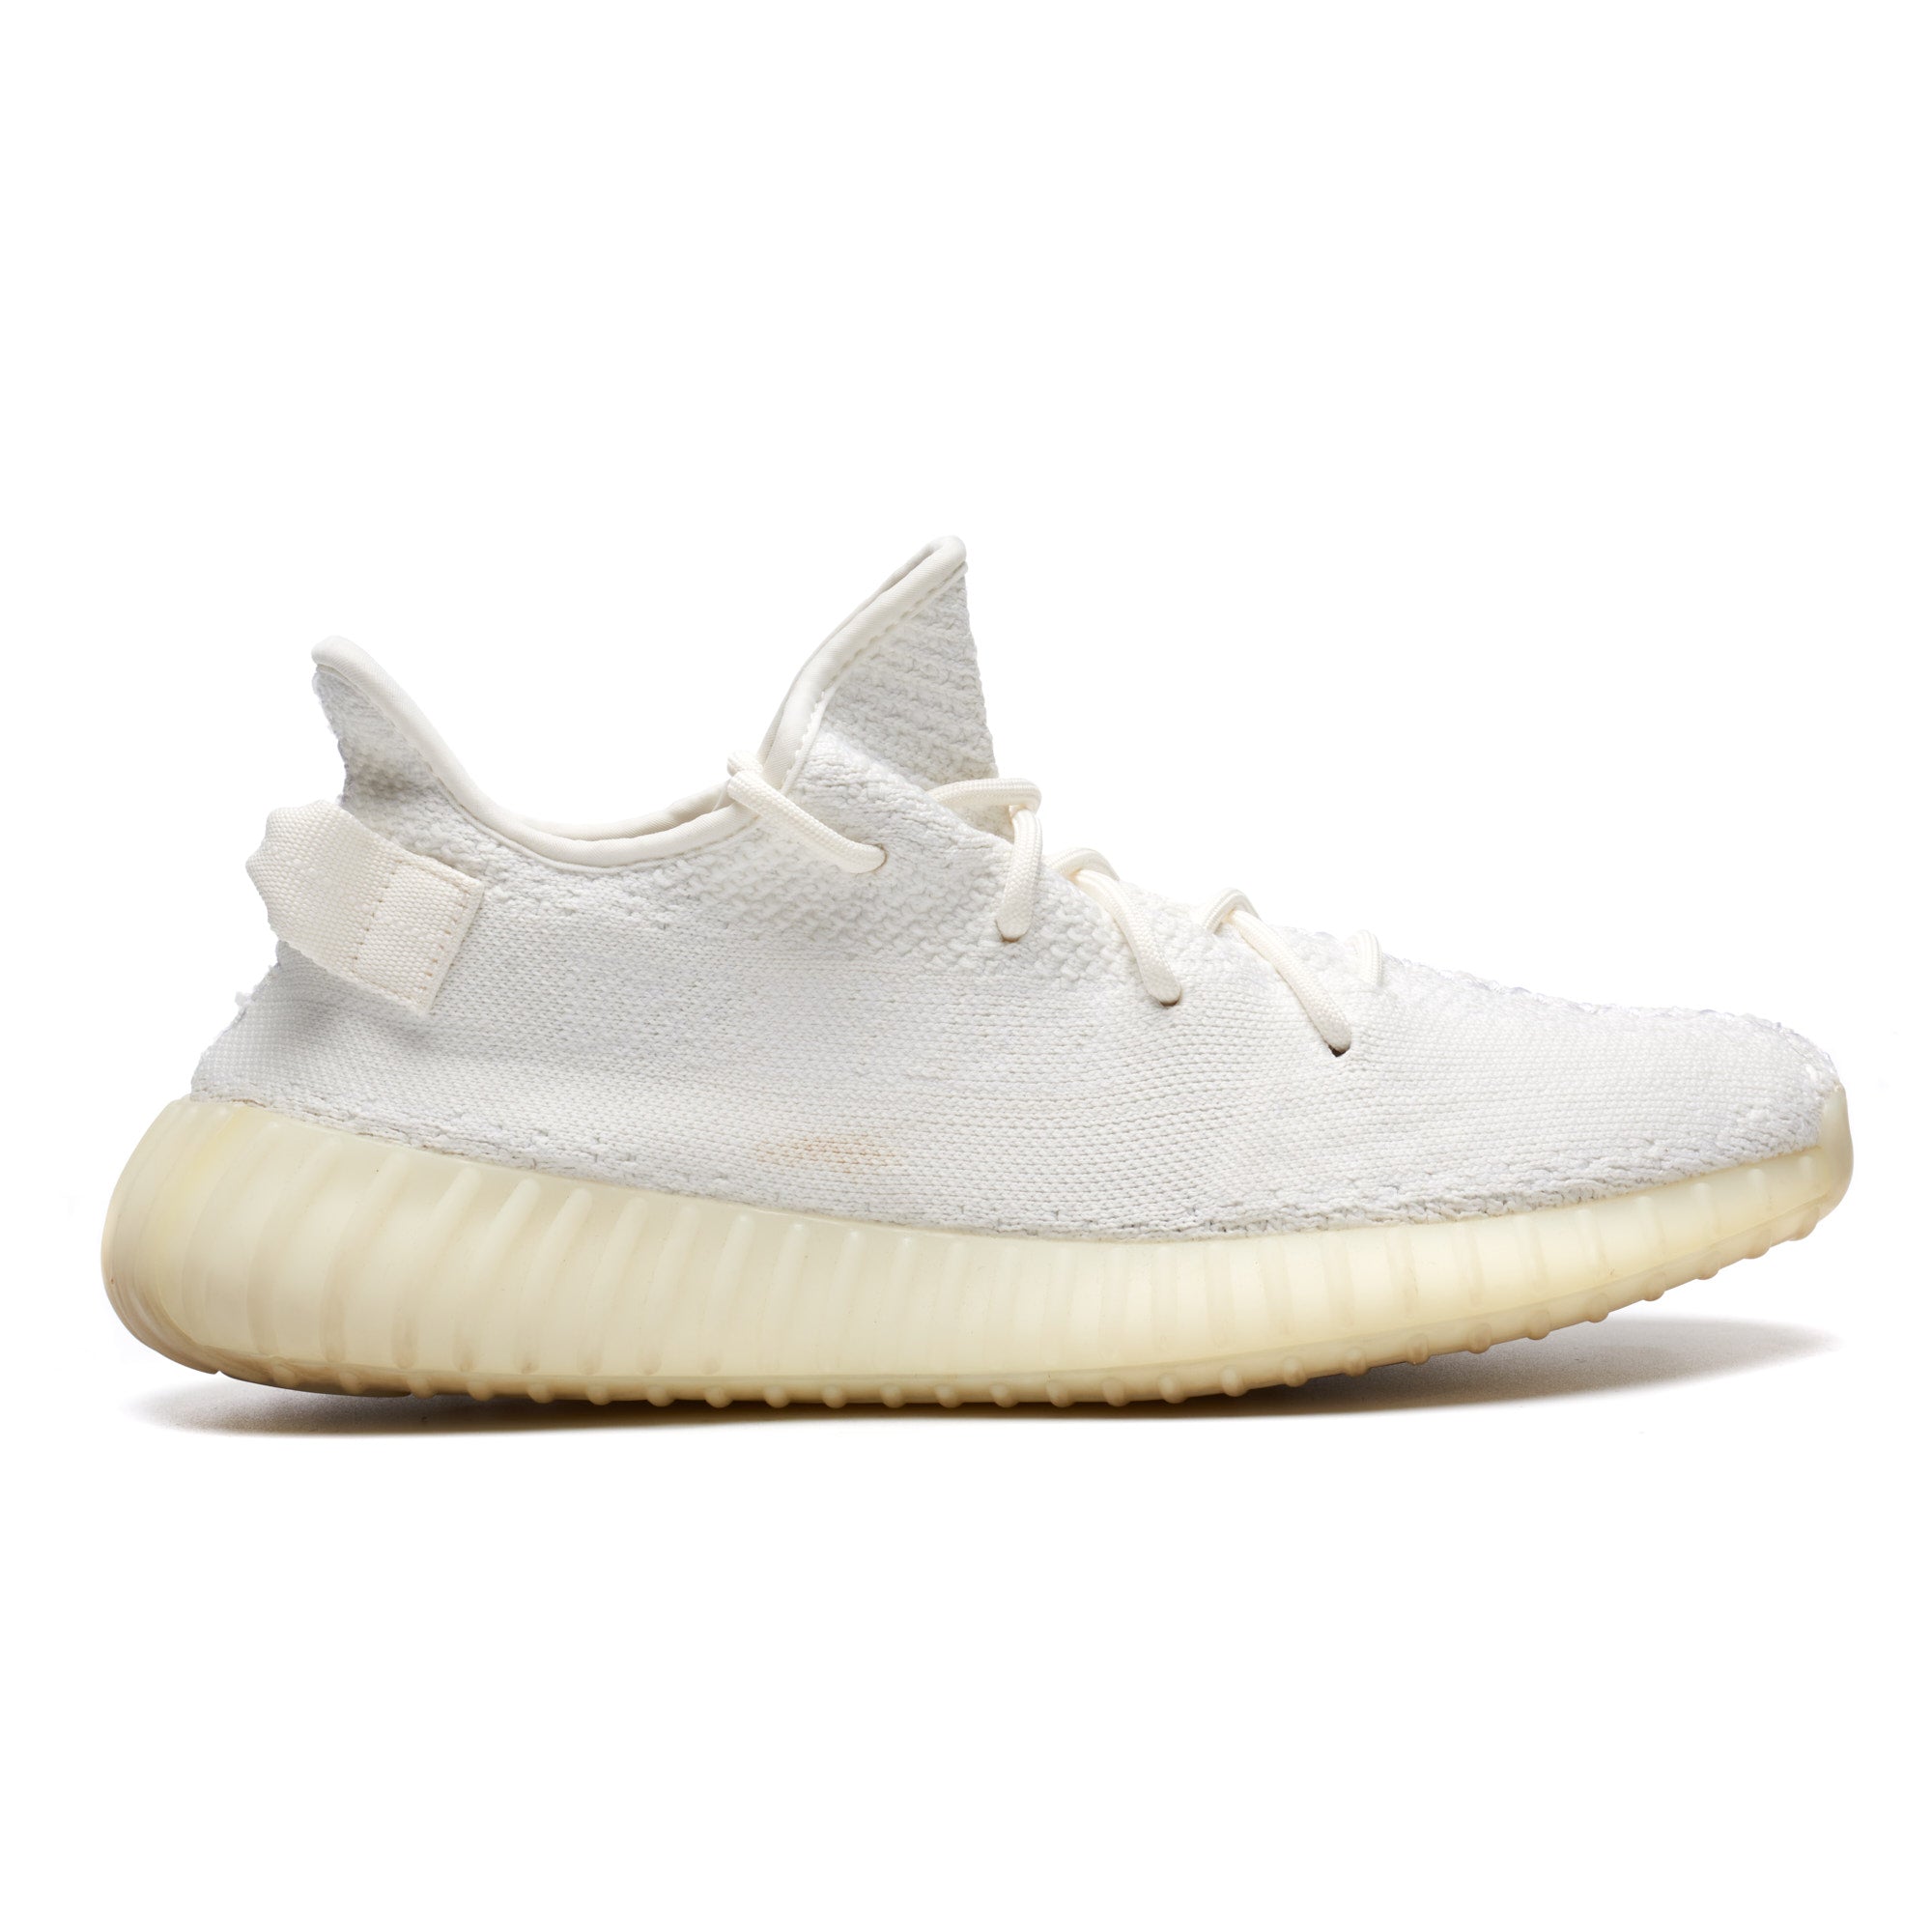 ADIDAS YEEZY 350 V2 Cream Triple White Sneakers Shoes US – SARTORIALE